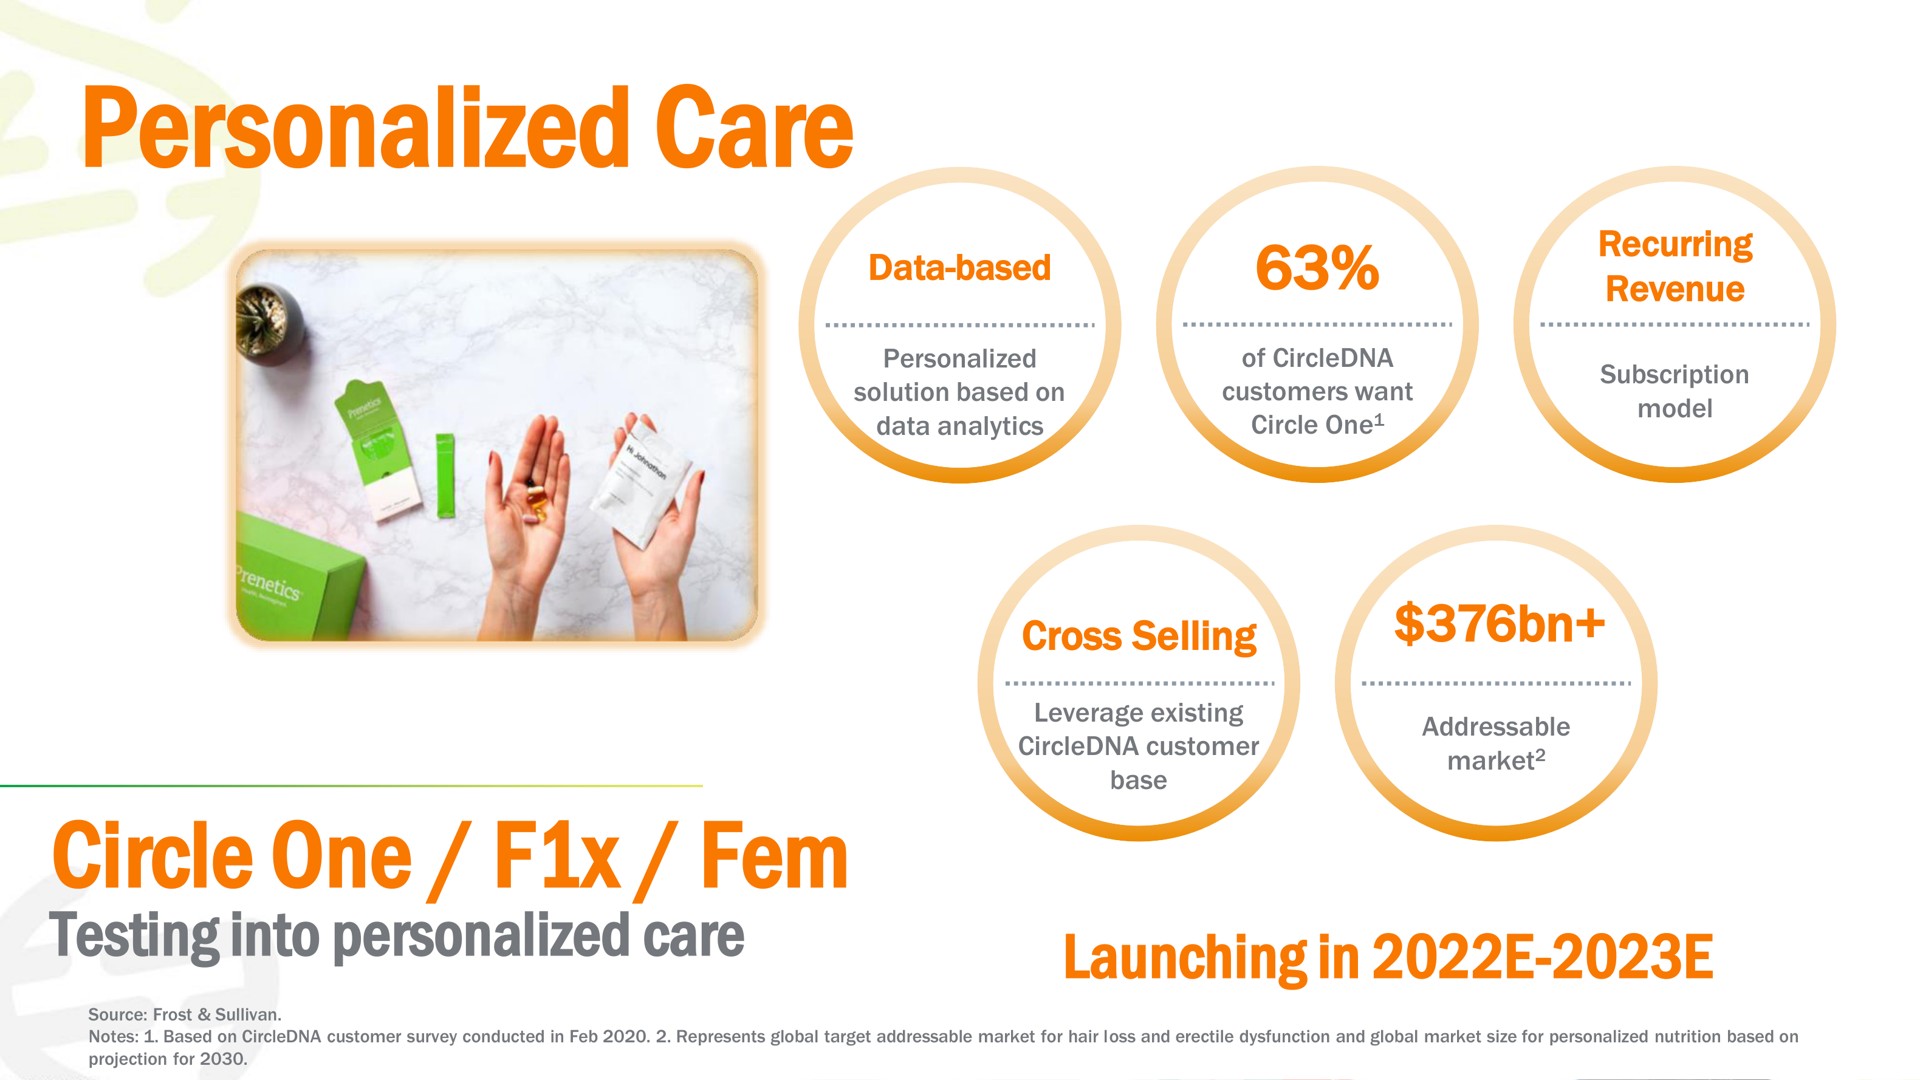 personalized care launching in circle one testing into personalized care | Prenetics